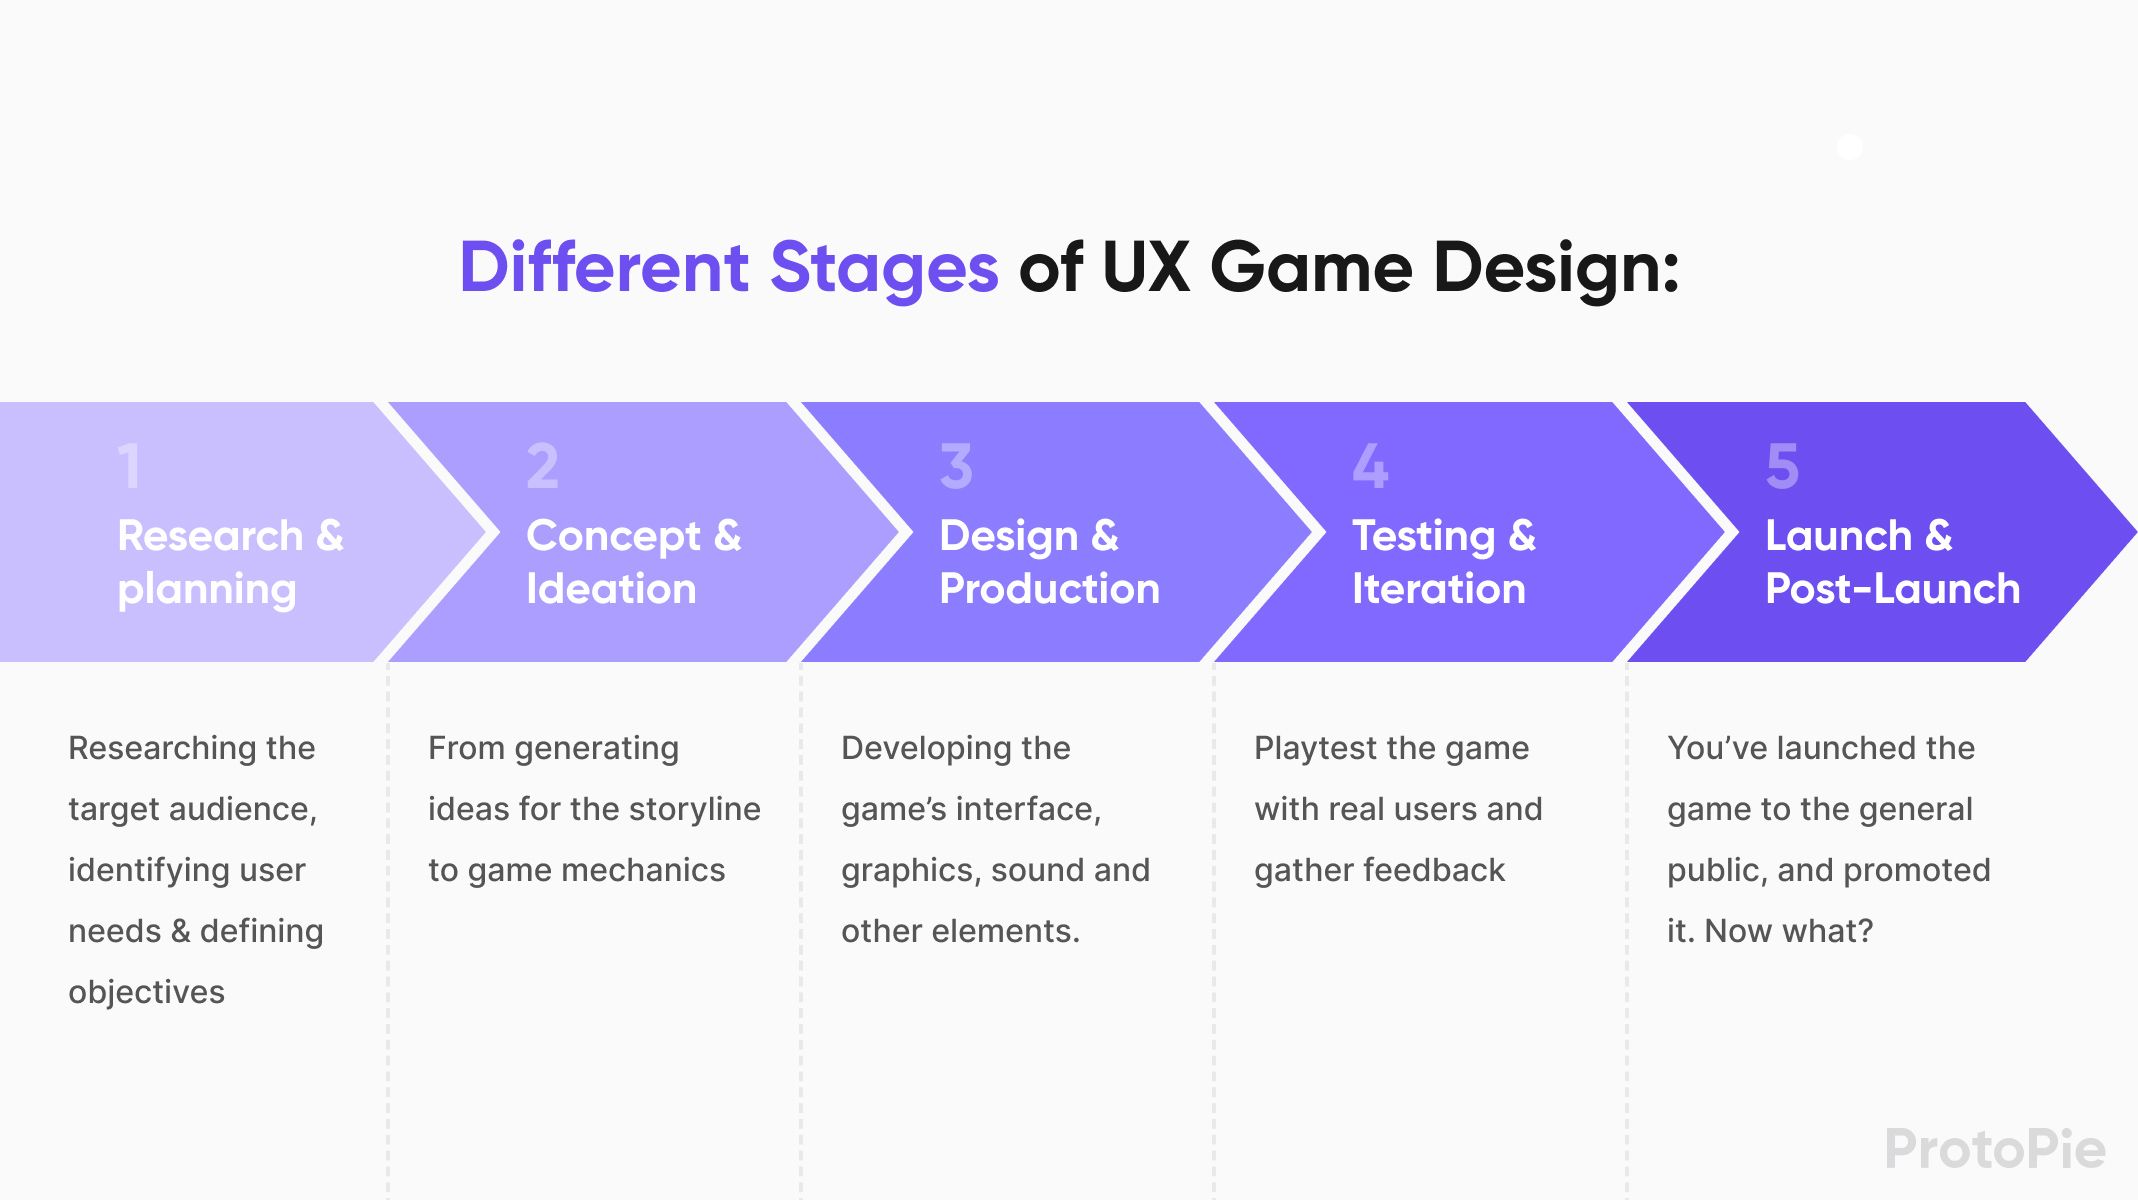 The stages of UX in game design